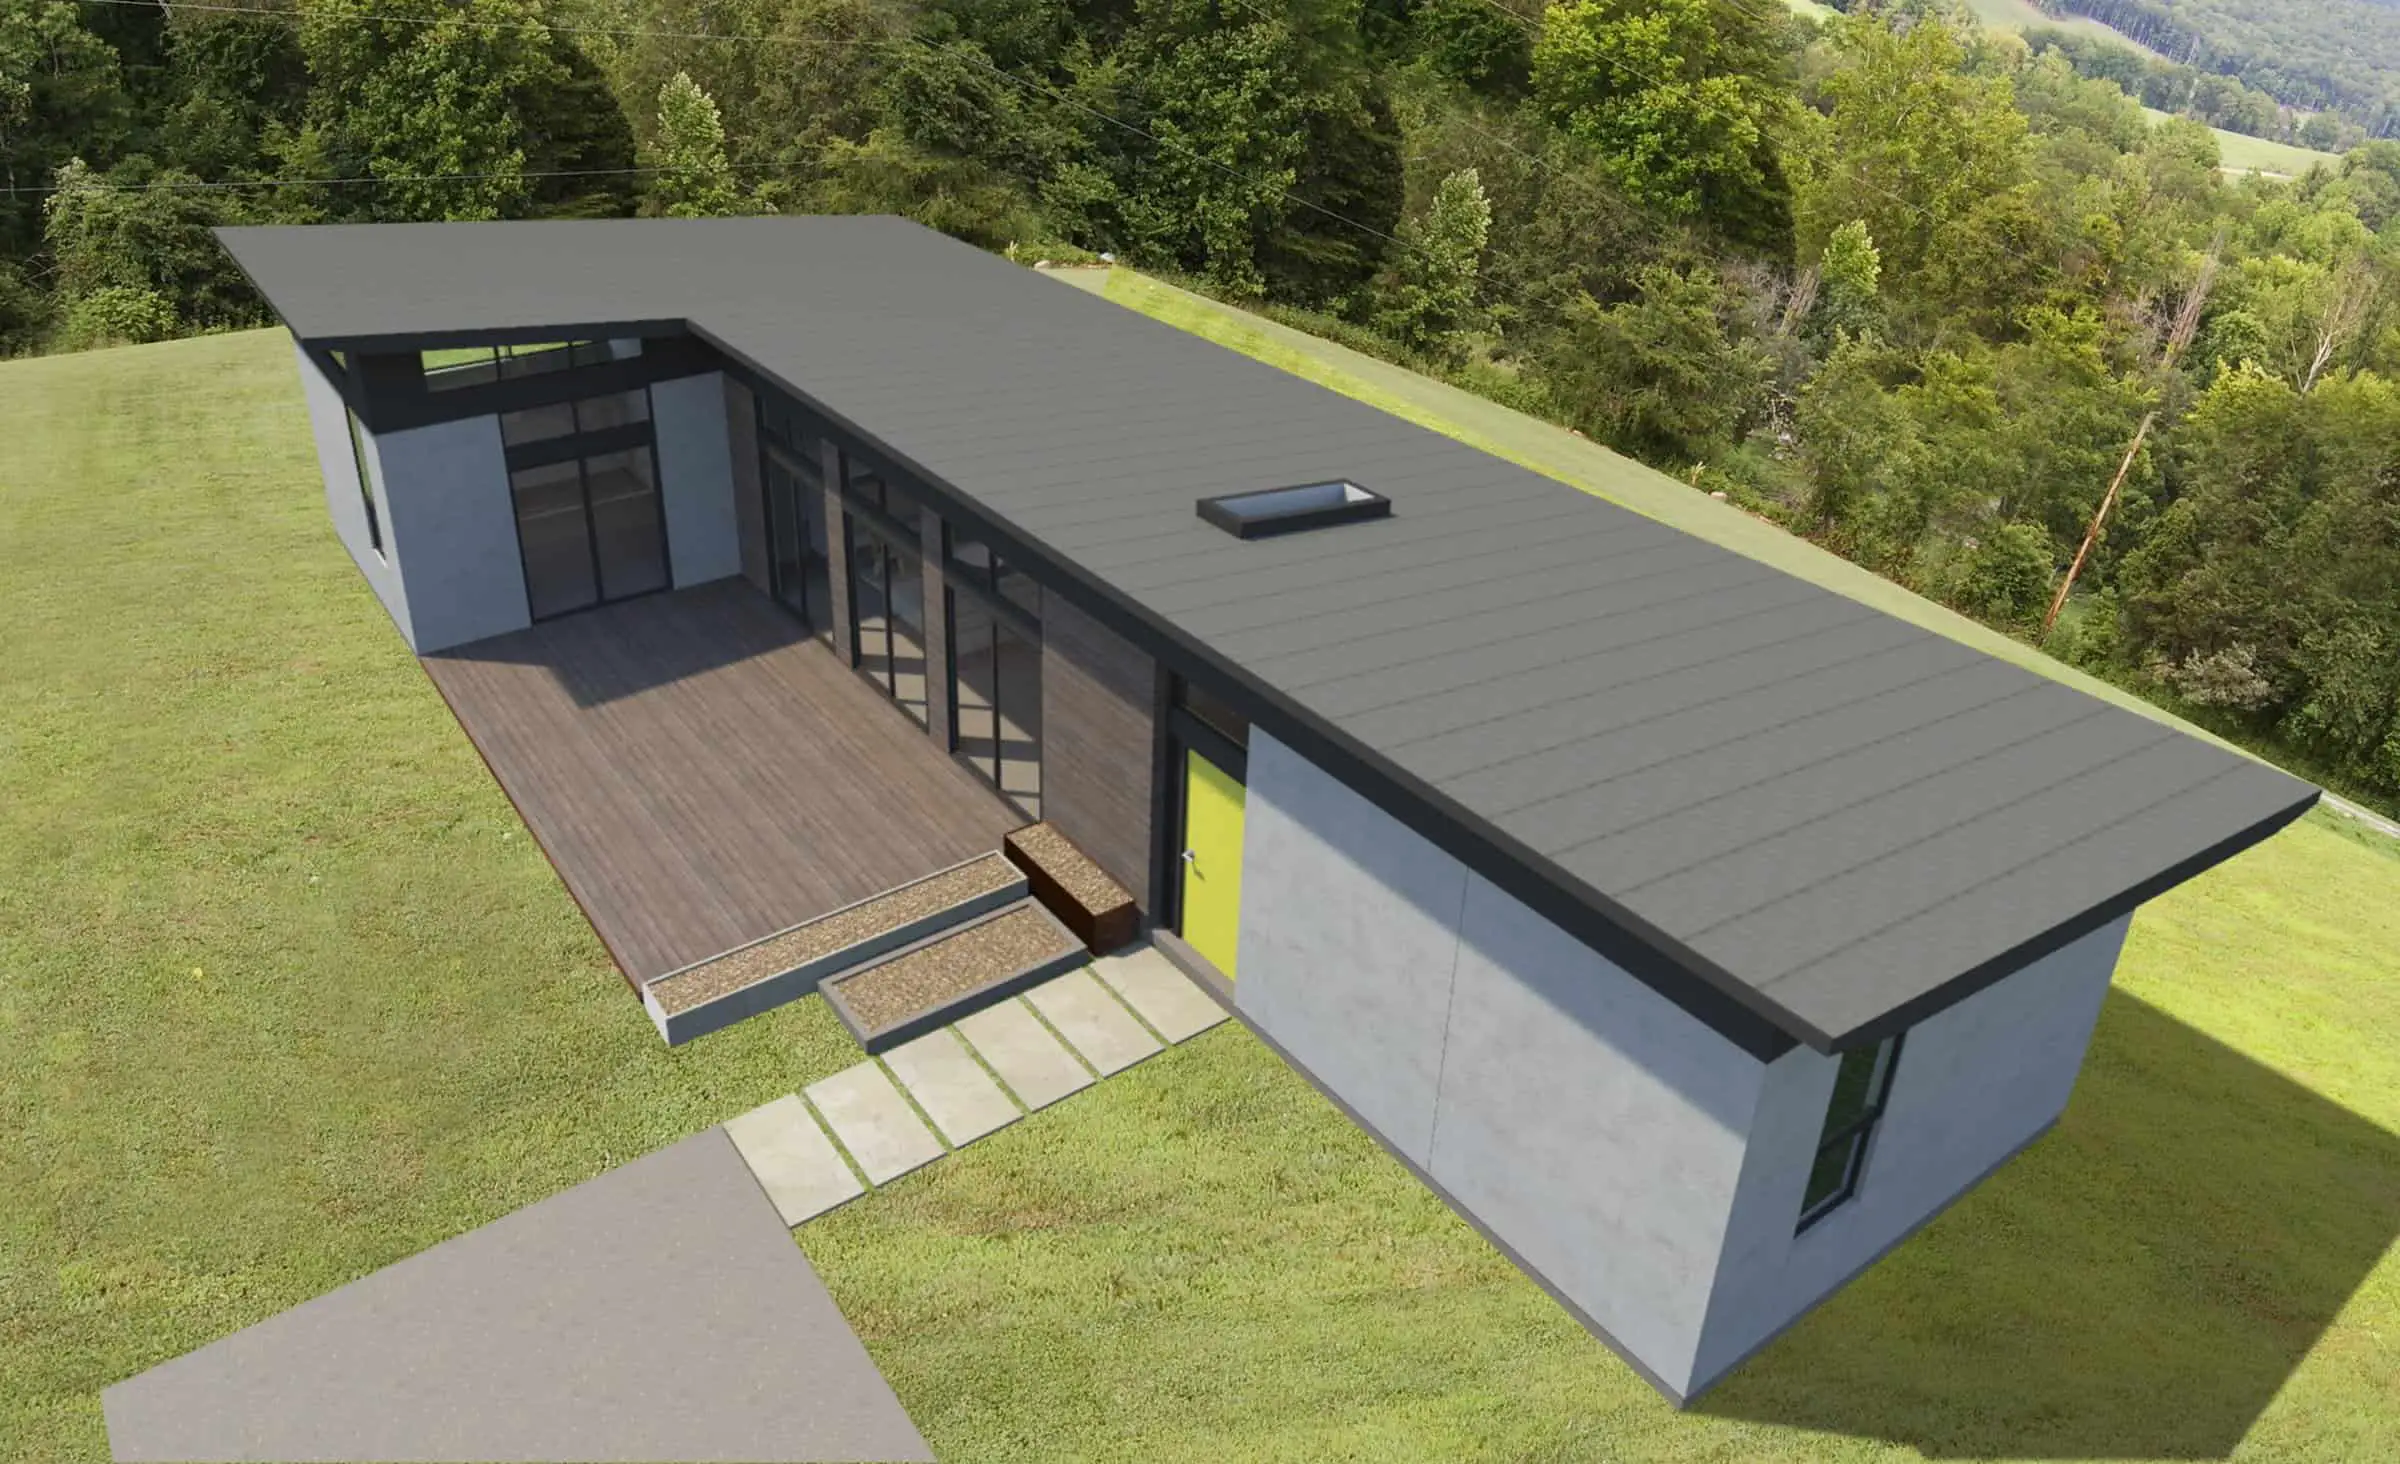 MA Modular L Plan modern prefab home model rendering showing roof and rear of home from above.